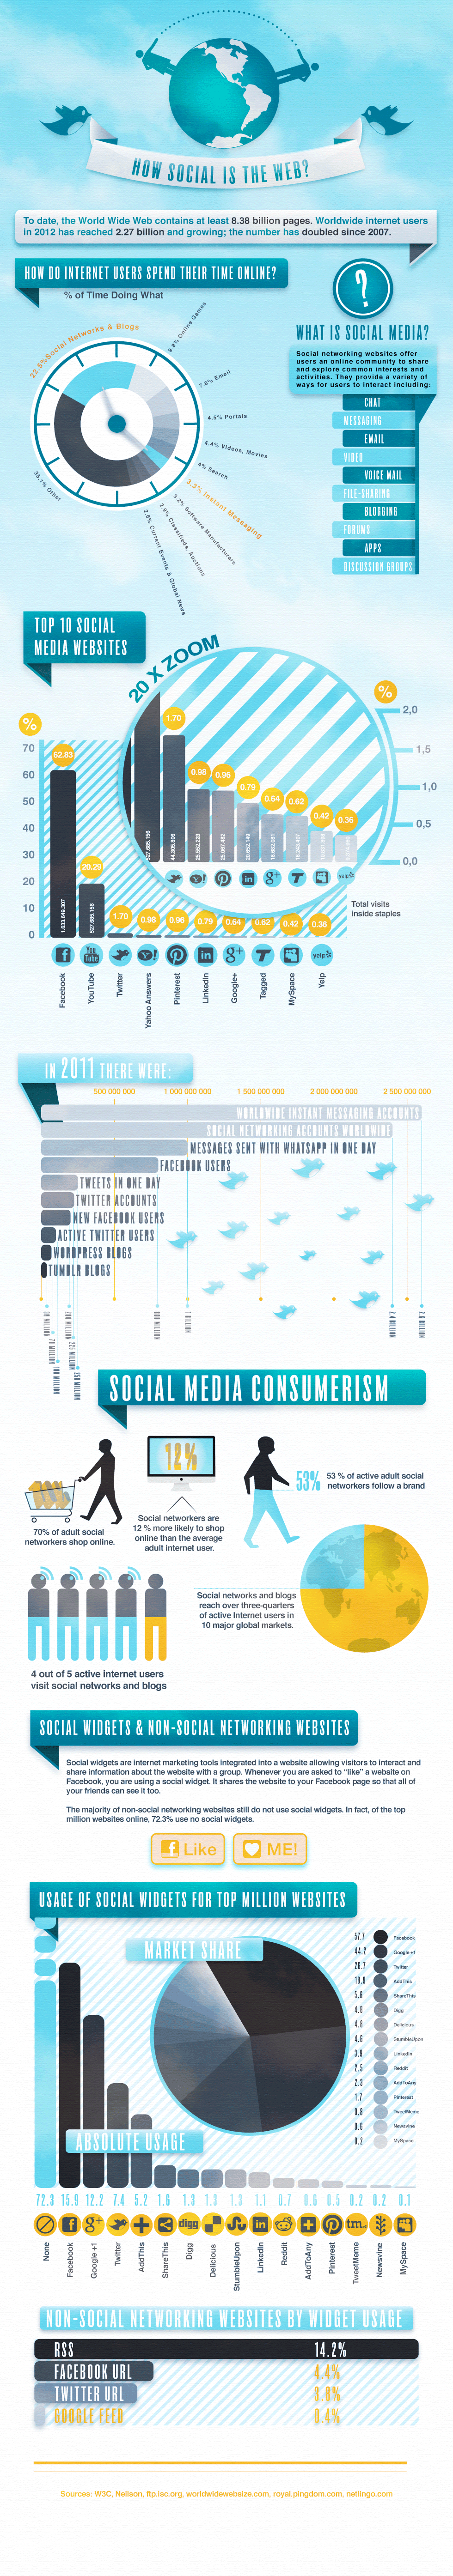 how-social-is-the-web